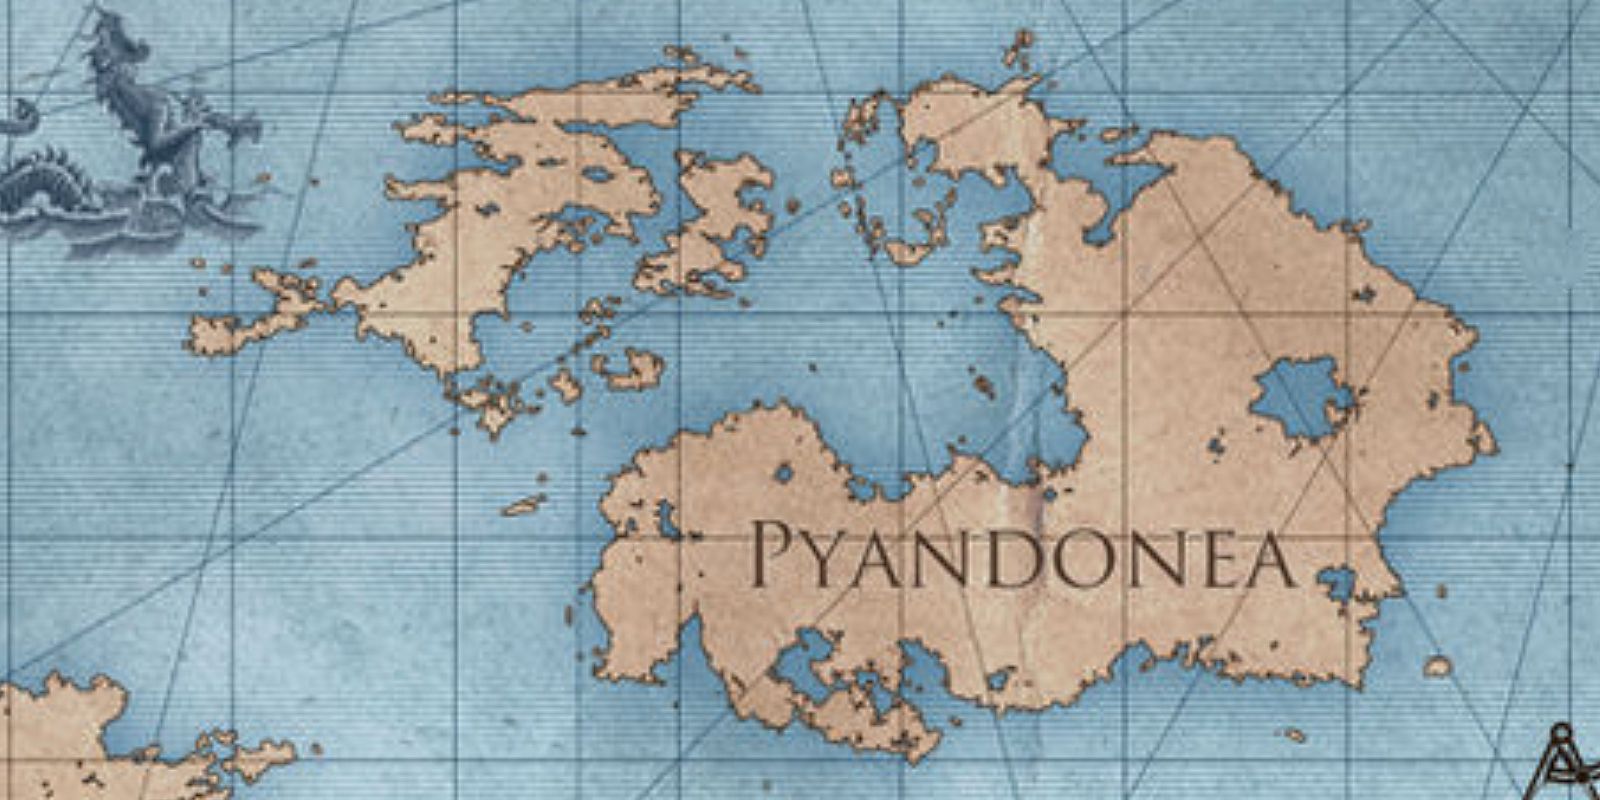 Where The New Elder Scrolls Online Expansion Could Be Set Pyandonea Continent